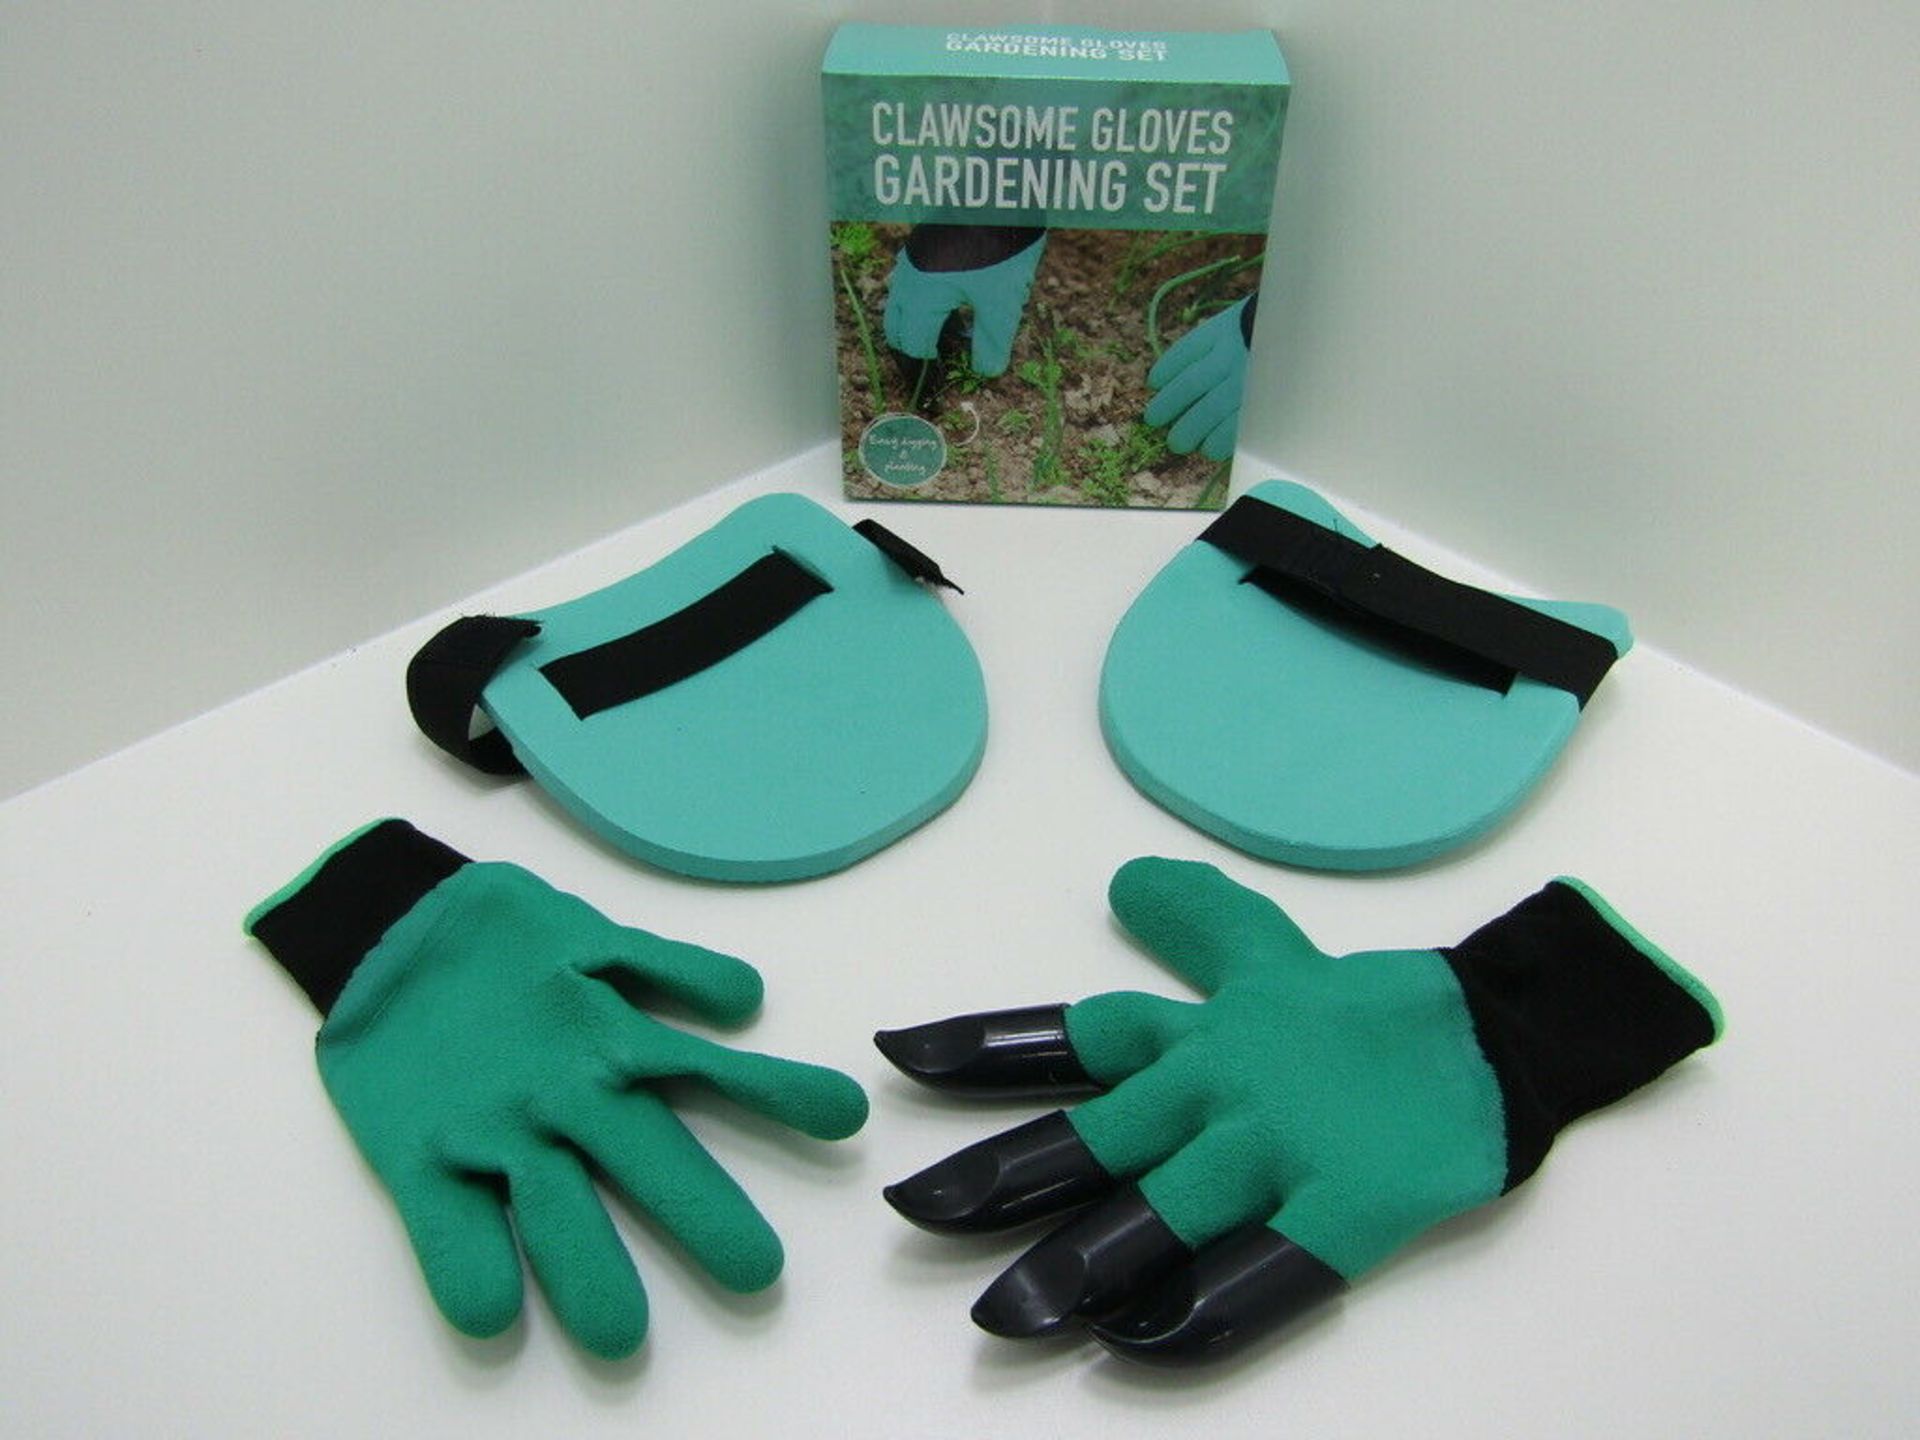 4x Digging Gloves. Gardeners Claw Finger Gloves and Knee Pad Set.